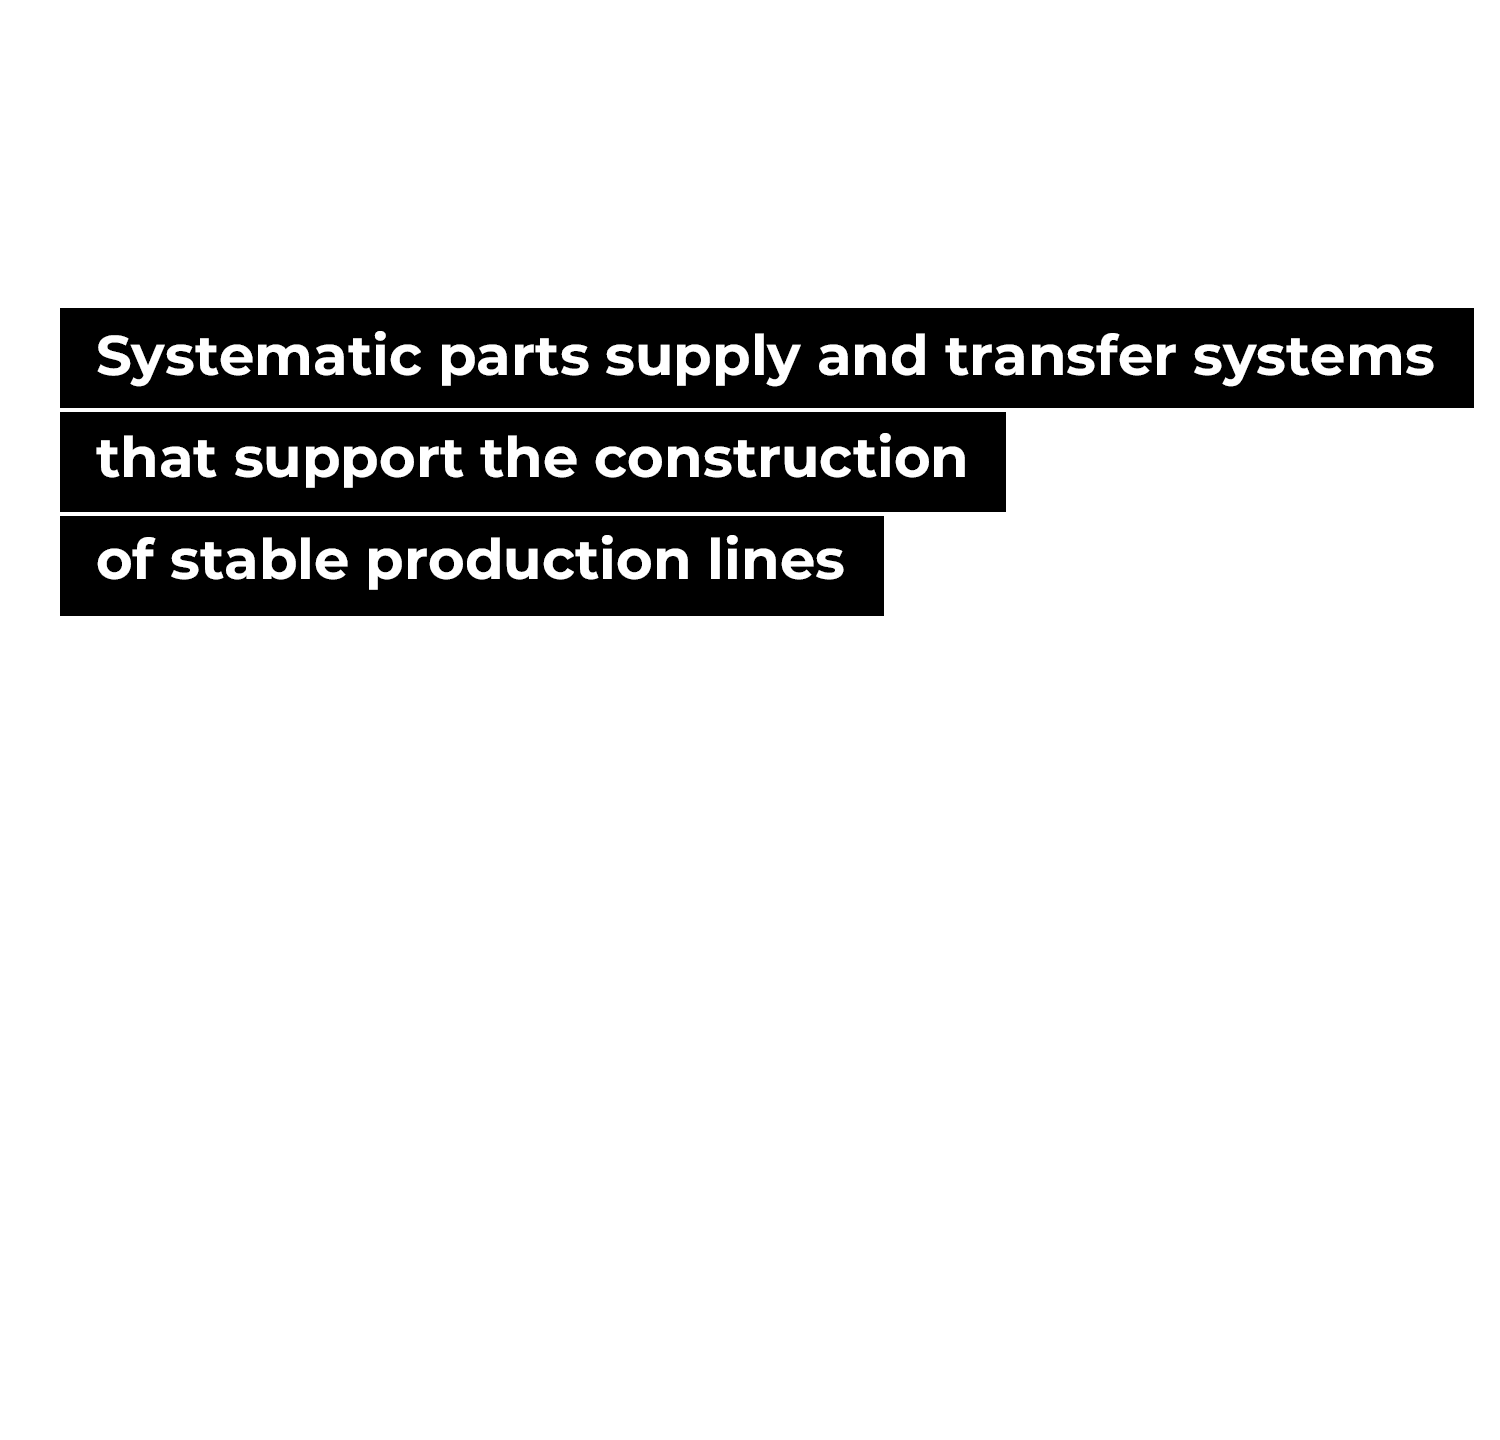 Systematic parts supply and transfer systems that support the construction of stable production lines